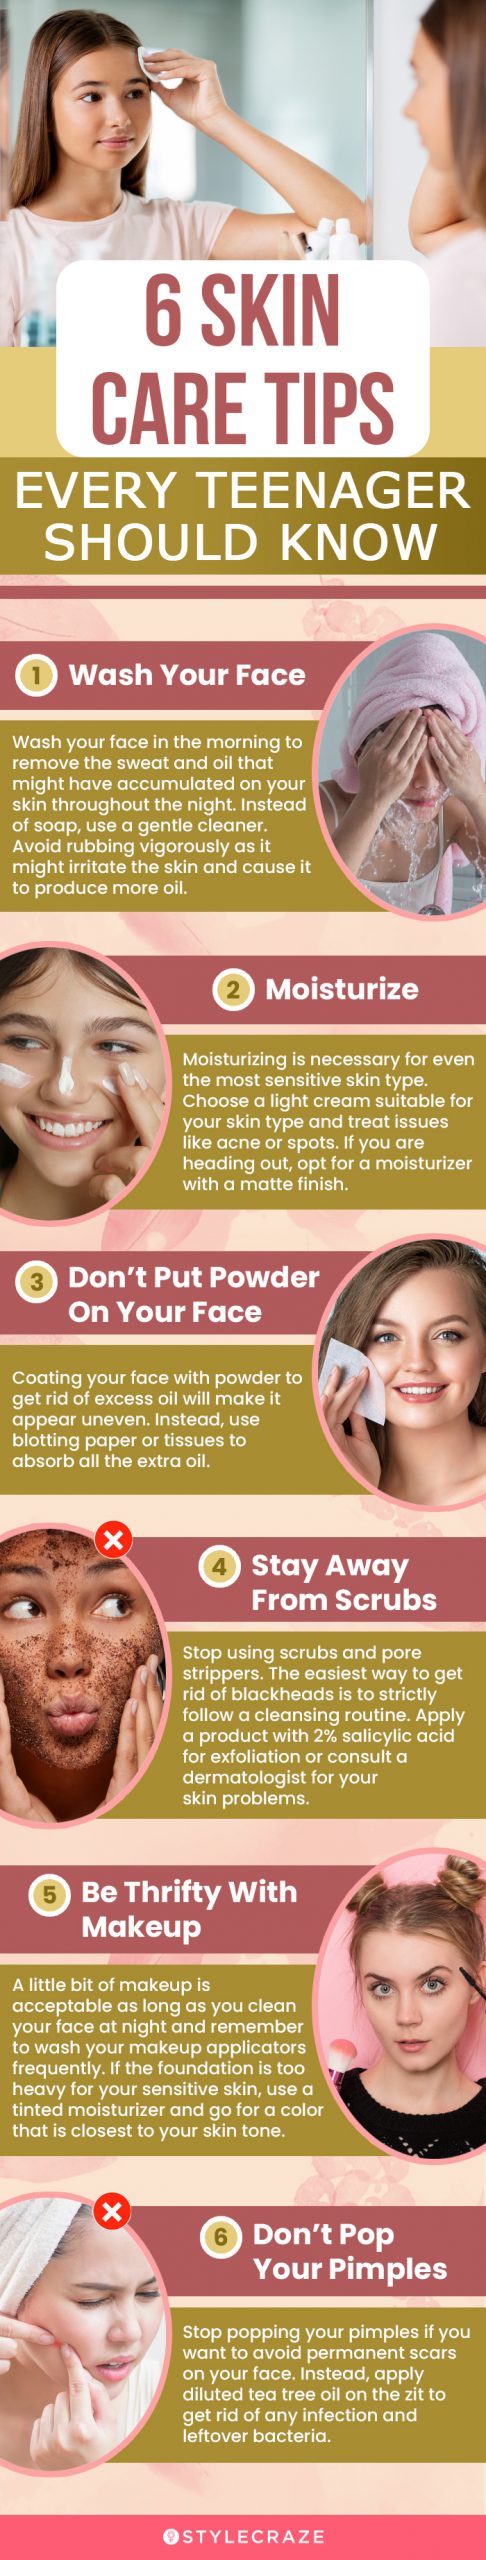 6 skin care tips every teenager should know[infographic]